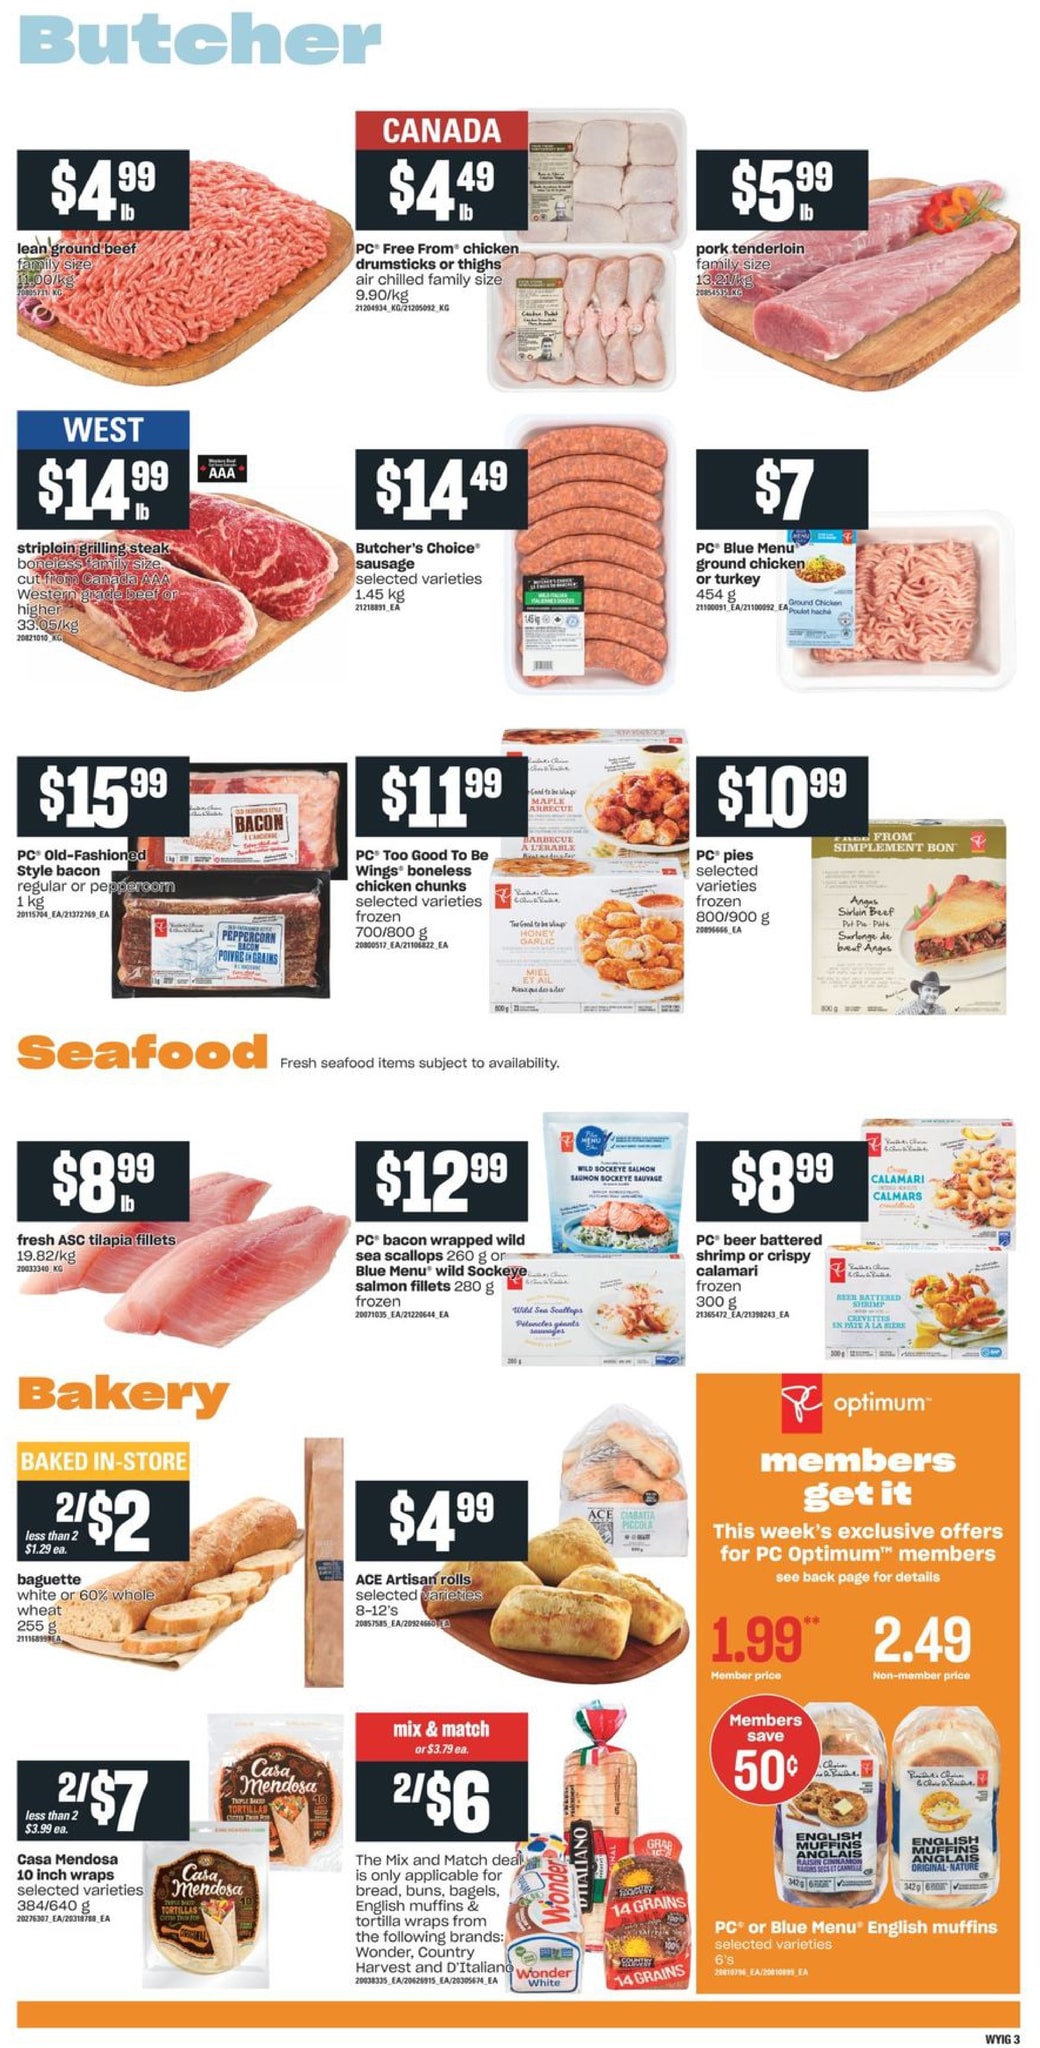 Independent British Columbia - Weekly Flyer Specials - Page 5